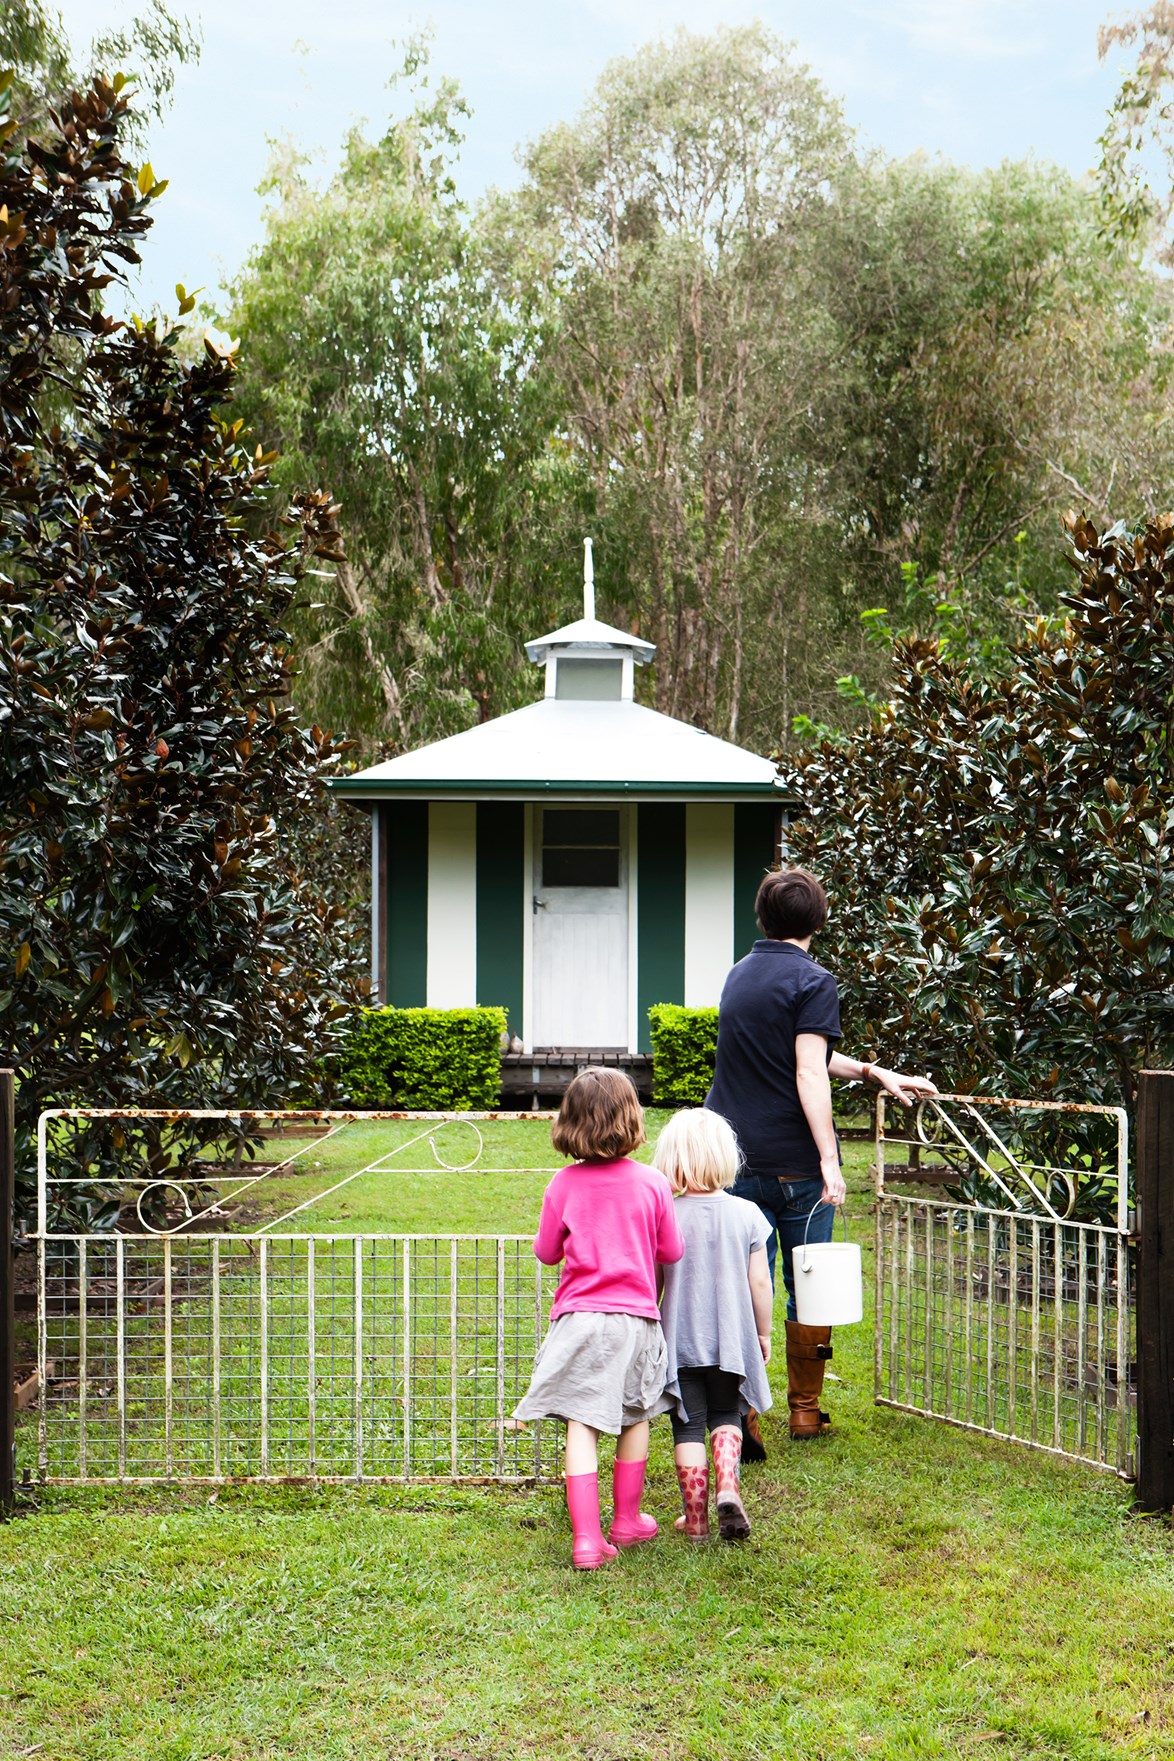 Albertine, six, and Gardenia, five, collect eggs from the pavilion-style chook pen at a [property in rural Queensland](https://www.homestolove.com.au/shacked-up-designers-find-the-perfect-family-fit-3817|target="_blank"). *Photo: Maree Homer*